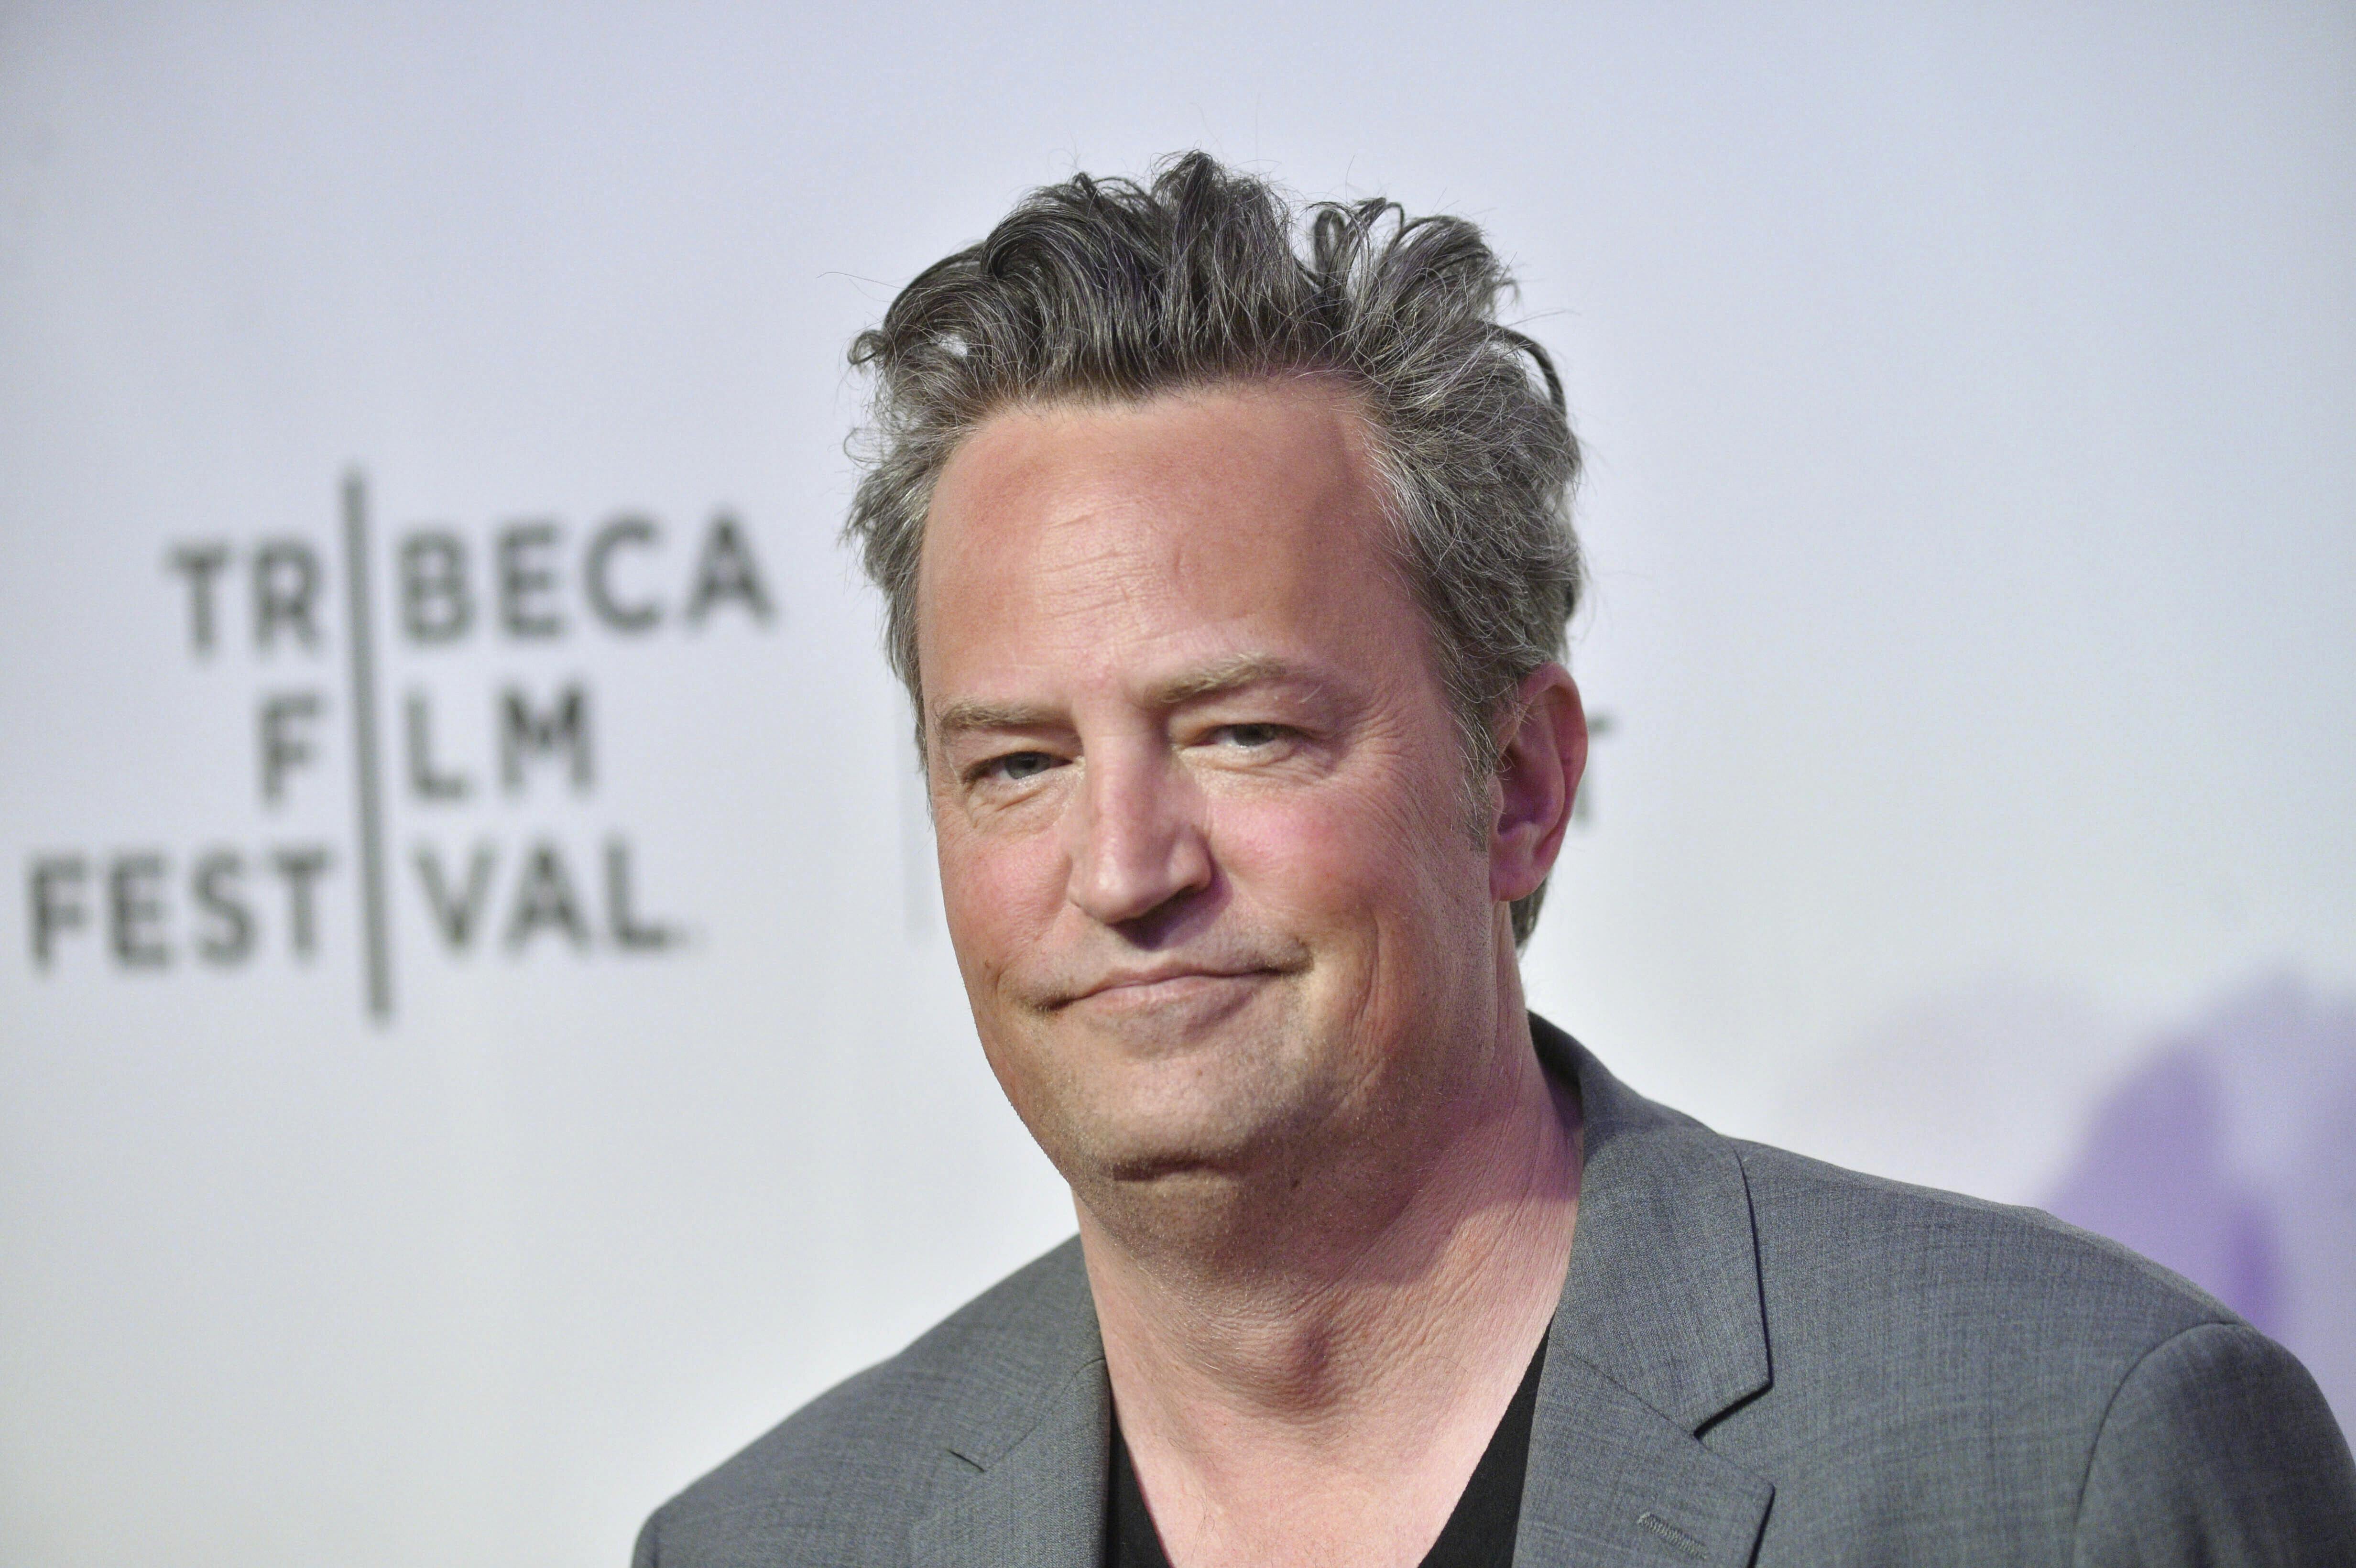 Photo by: NDZ/STAR MAX/IPx 2023 4/26/17 Matthew Perry attends "The Circle" screening during the 2017 Tribeca Film Festival at BMCC Tribeca PAC on April 26, 2017 in New York City.